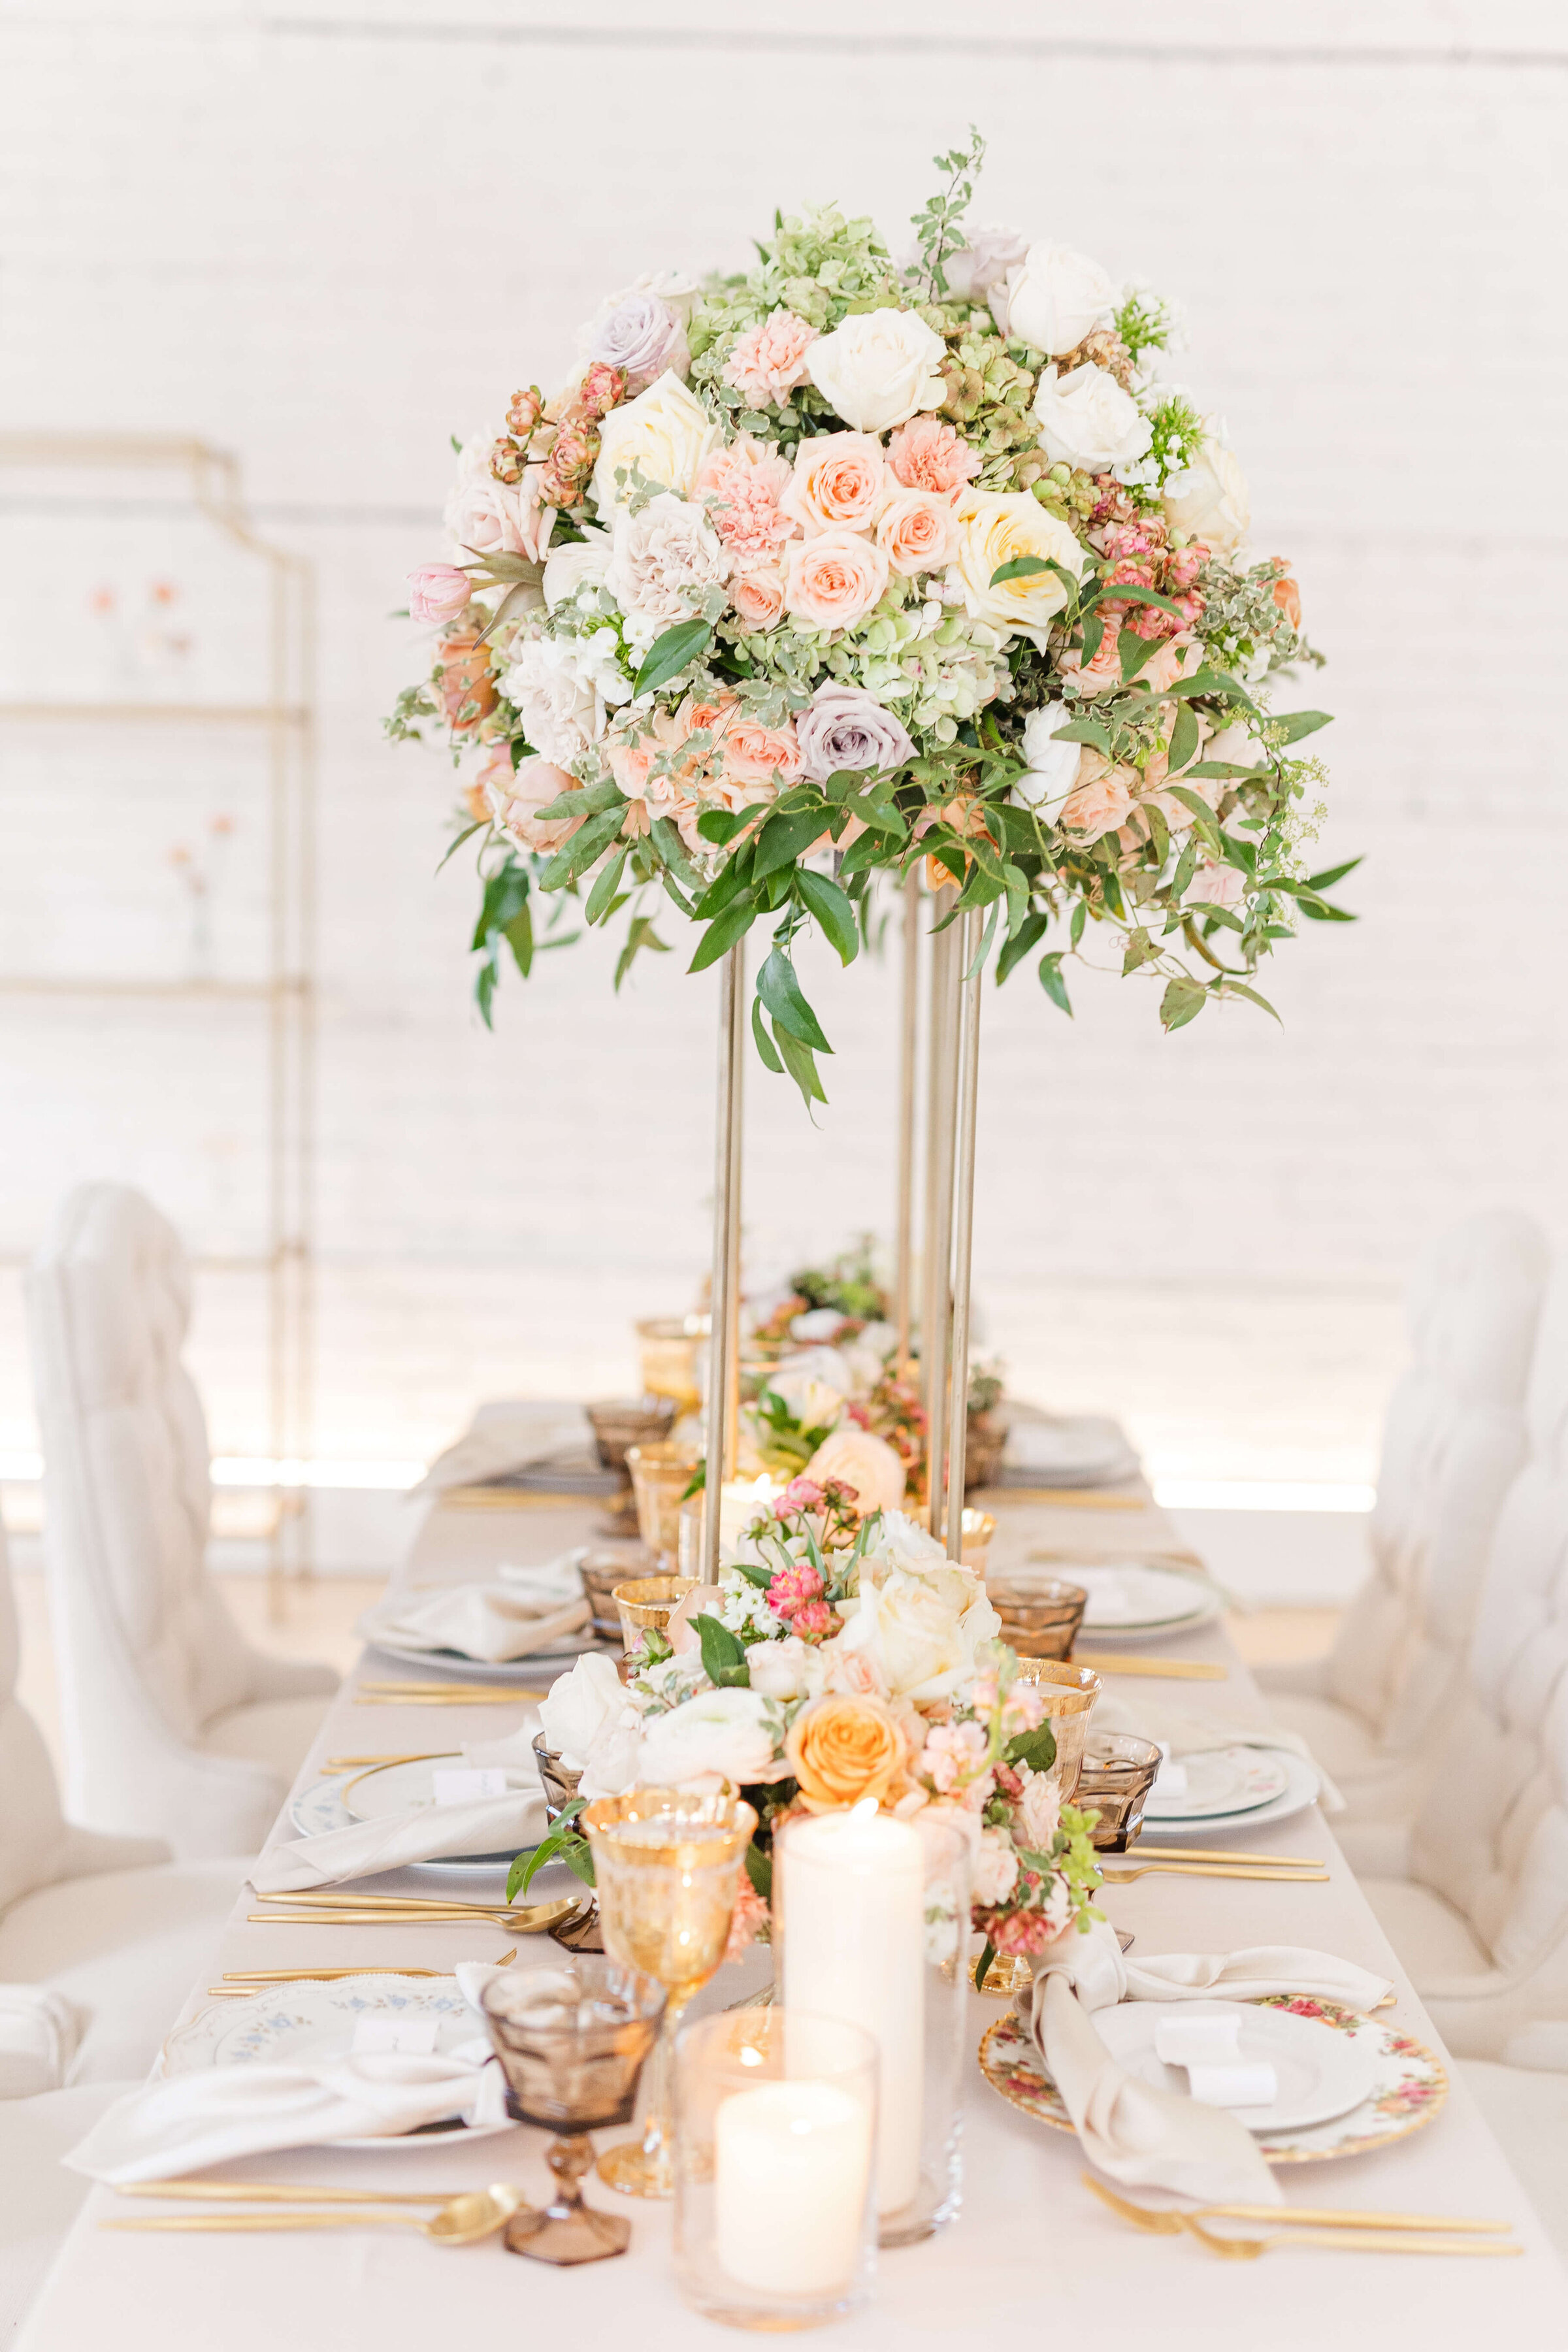 A wedding reception table with a tall floral centerpiece full of pink, blush, and peach flowers. There are other flowers and rose glasses on the table. The table is ivory and so are the chairs